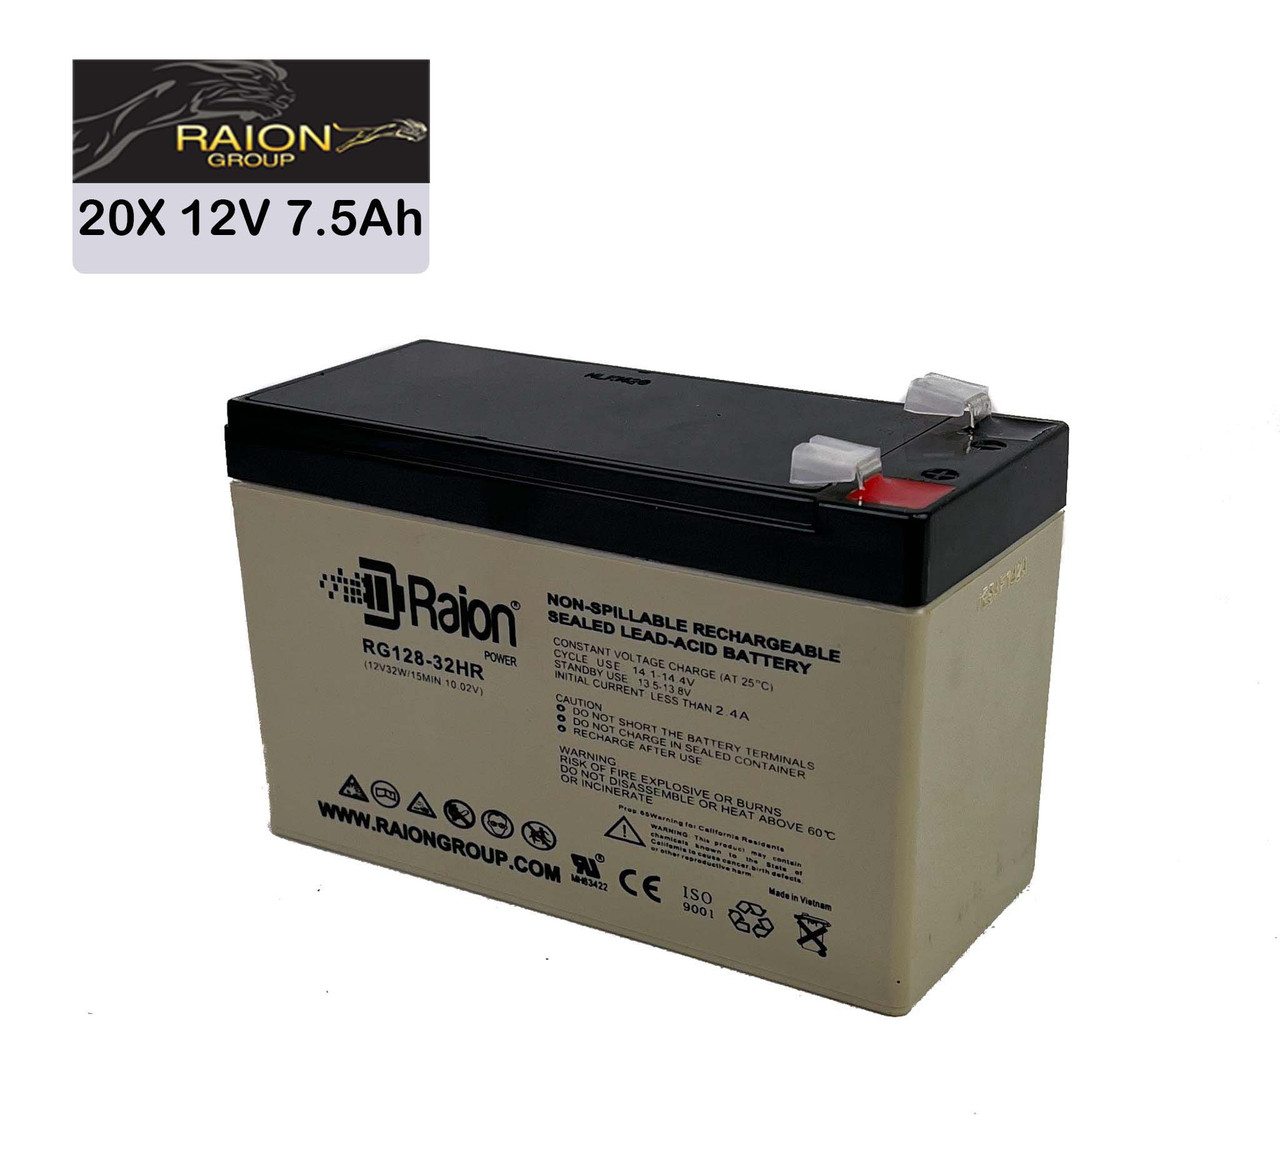 Raion Power 12V 7.5Ah High Rate Discharge UPS Batteries for Minuteman ED6200T - 20 Pack